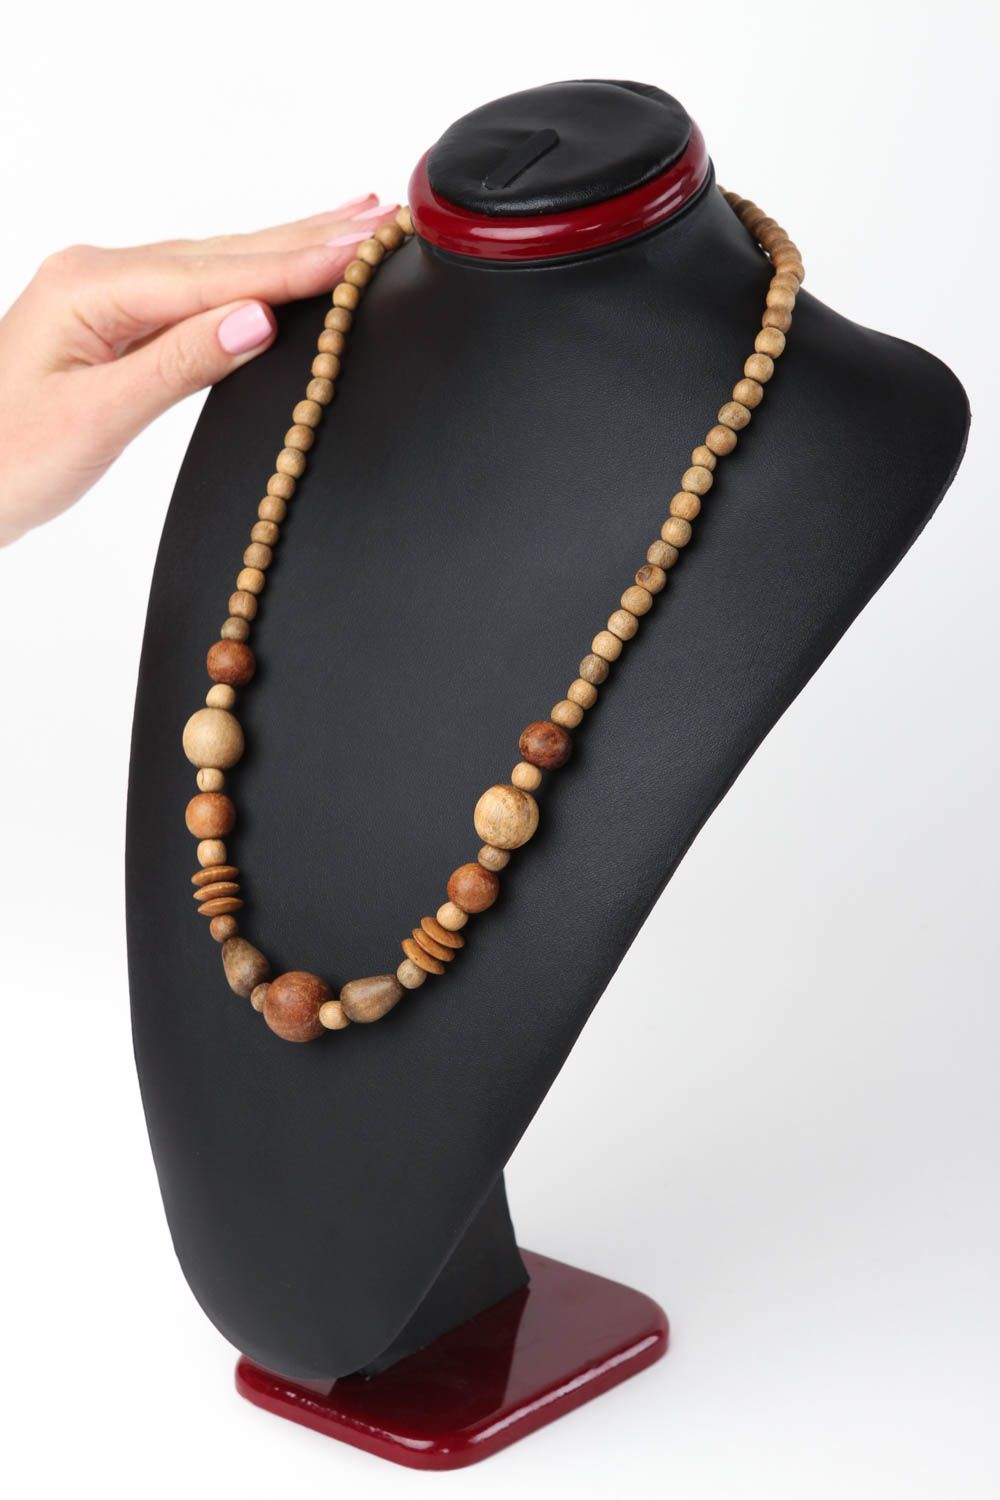 Handmade beaded necklace wooden necklace beaded accessories fashion jewelry photo 5